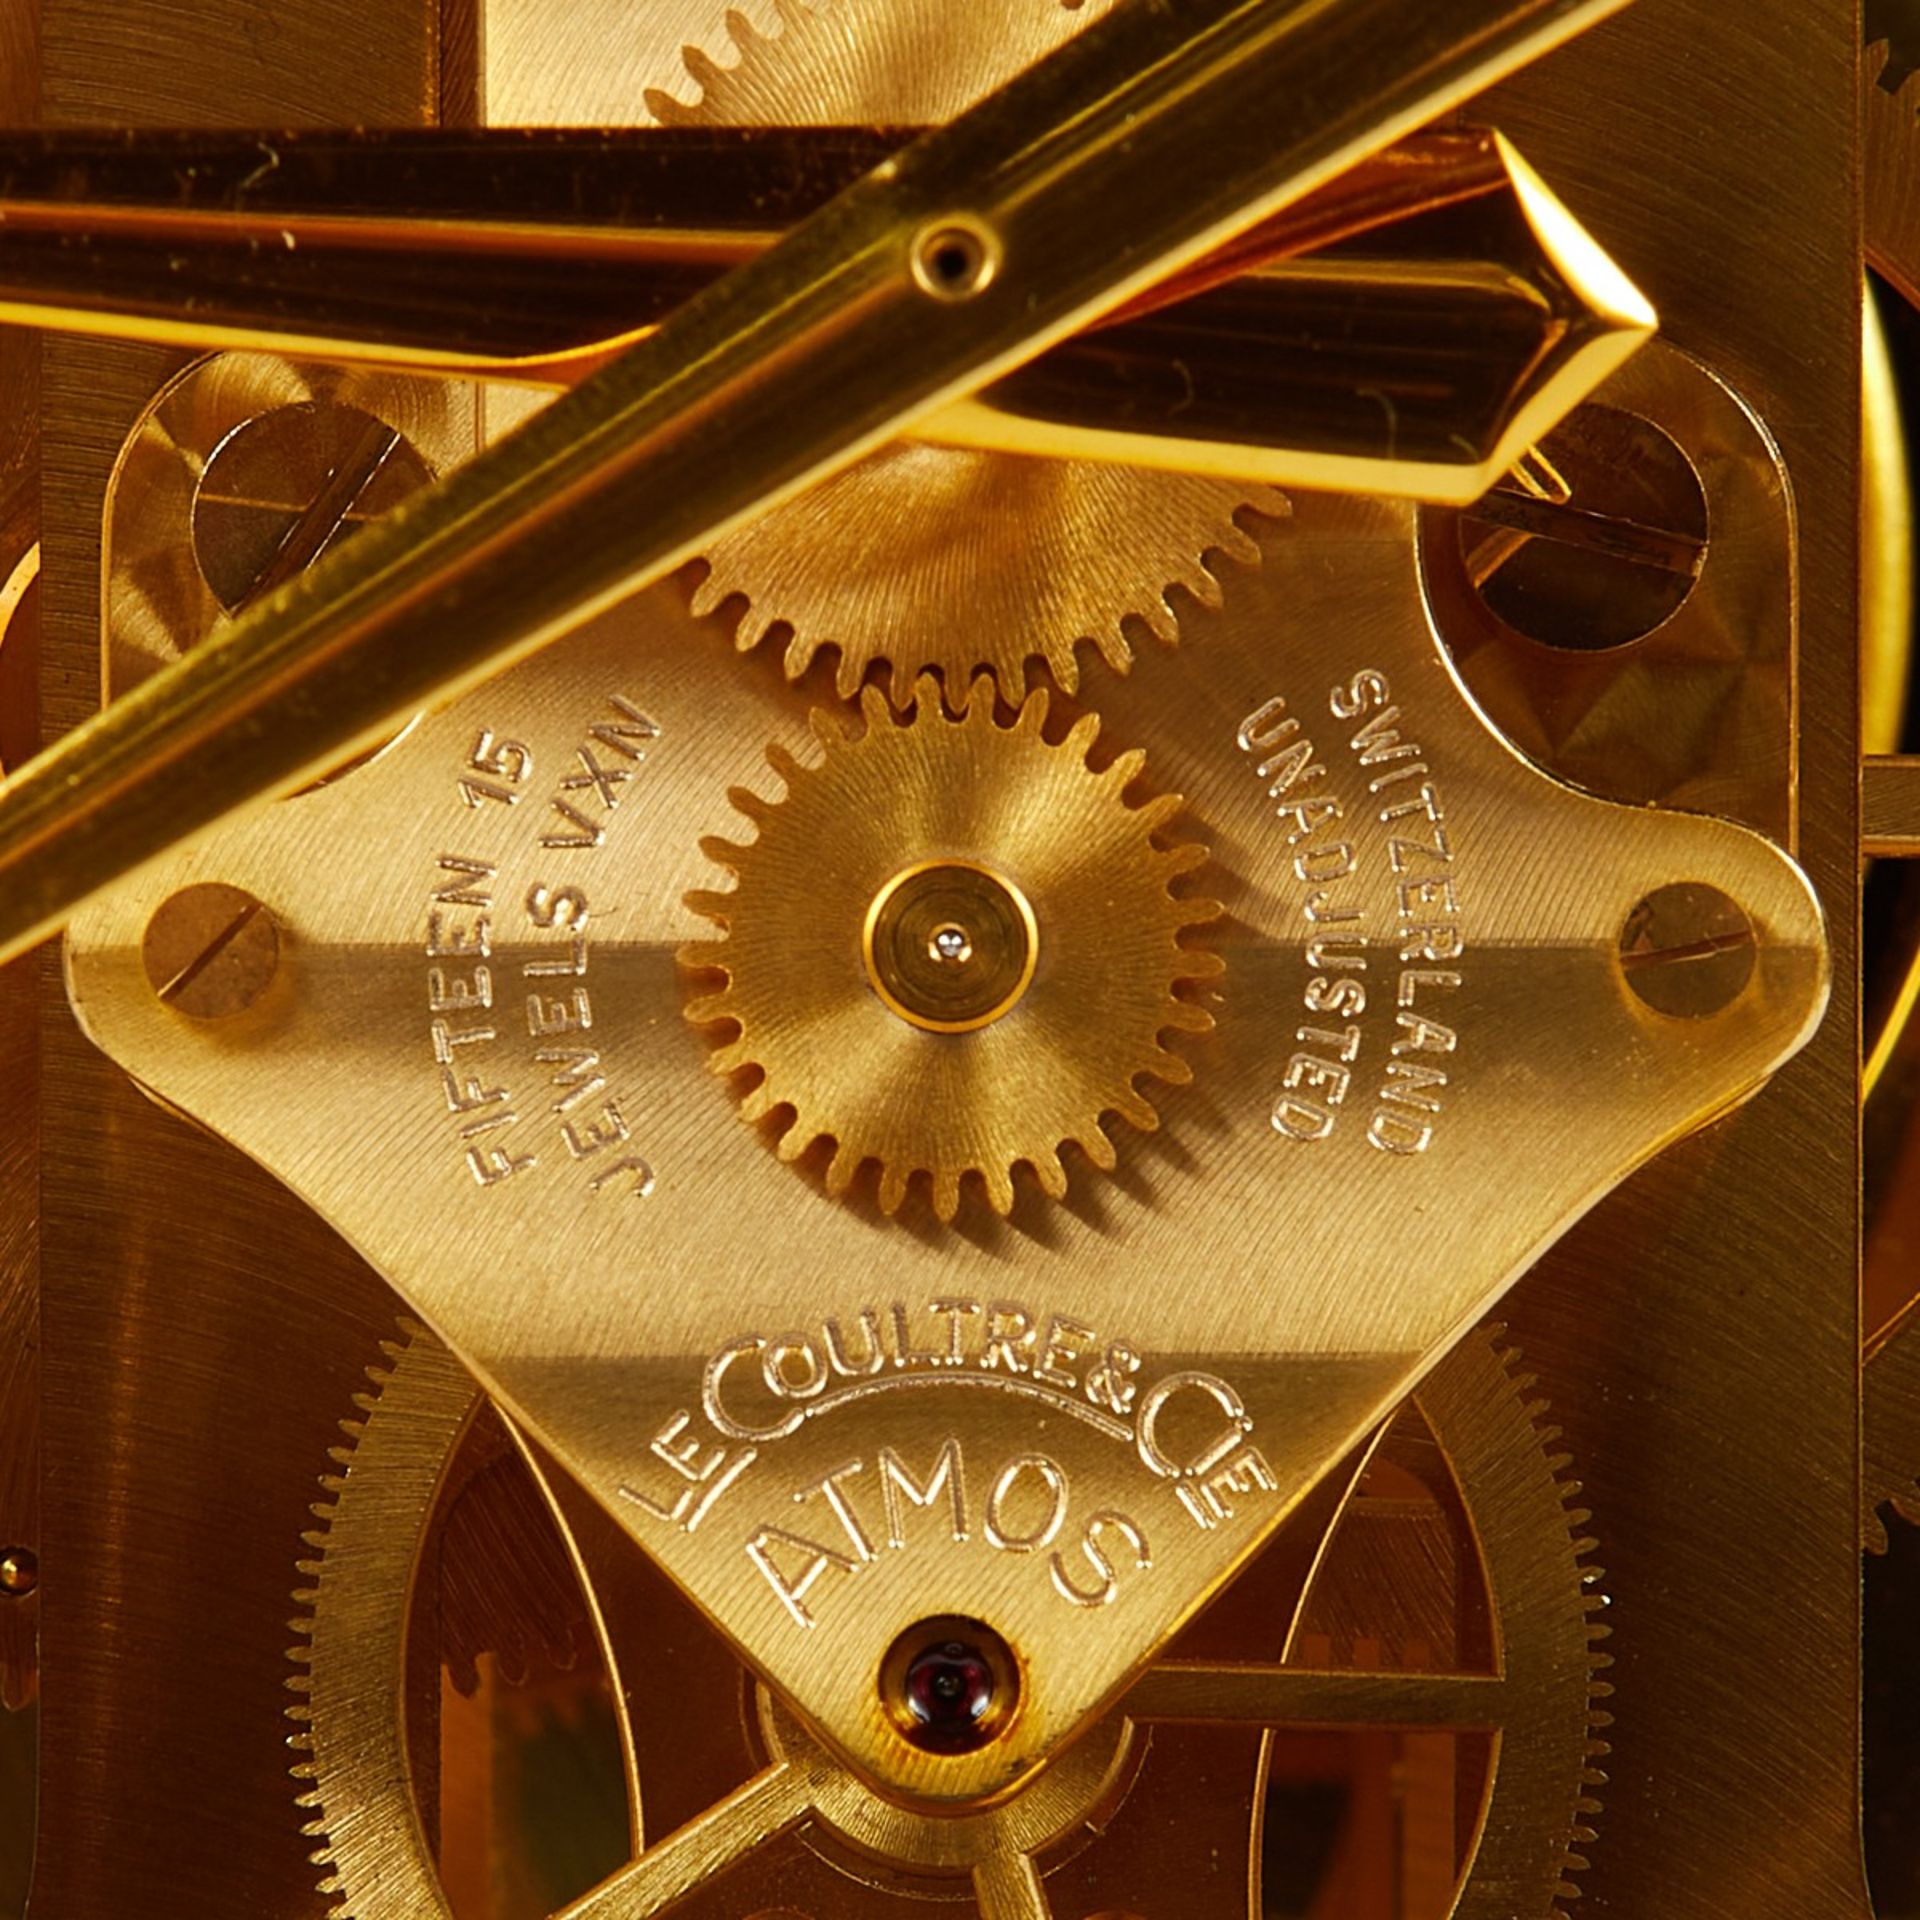 Jaeger LeCoultre Gold Atmos Table Clock - Image 2 of 7